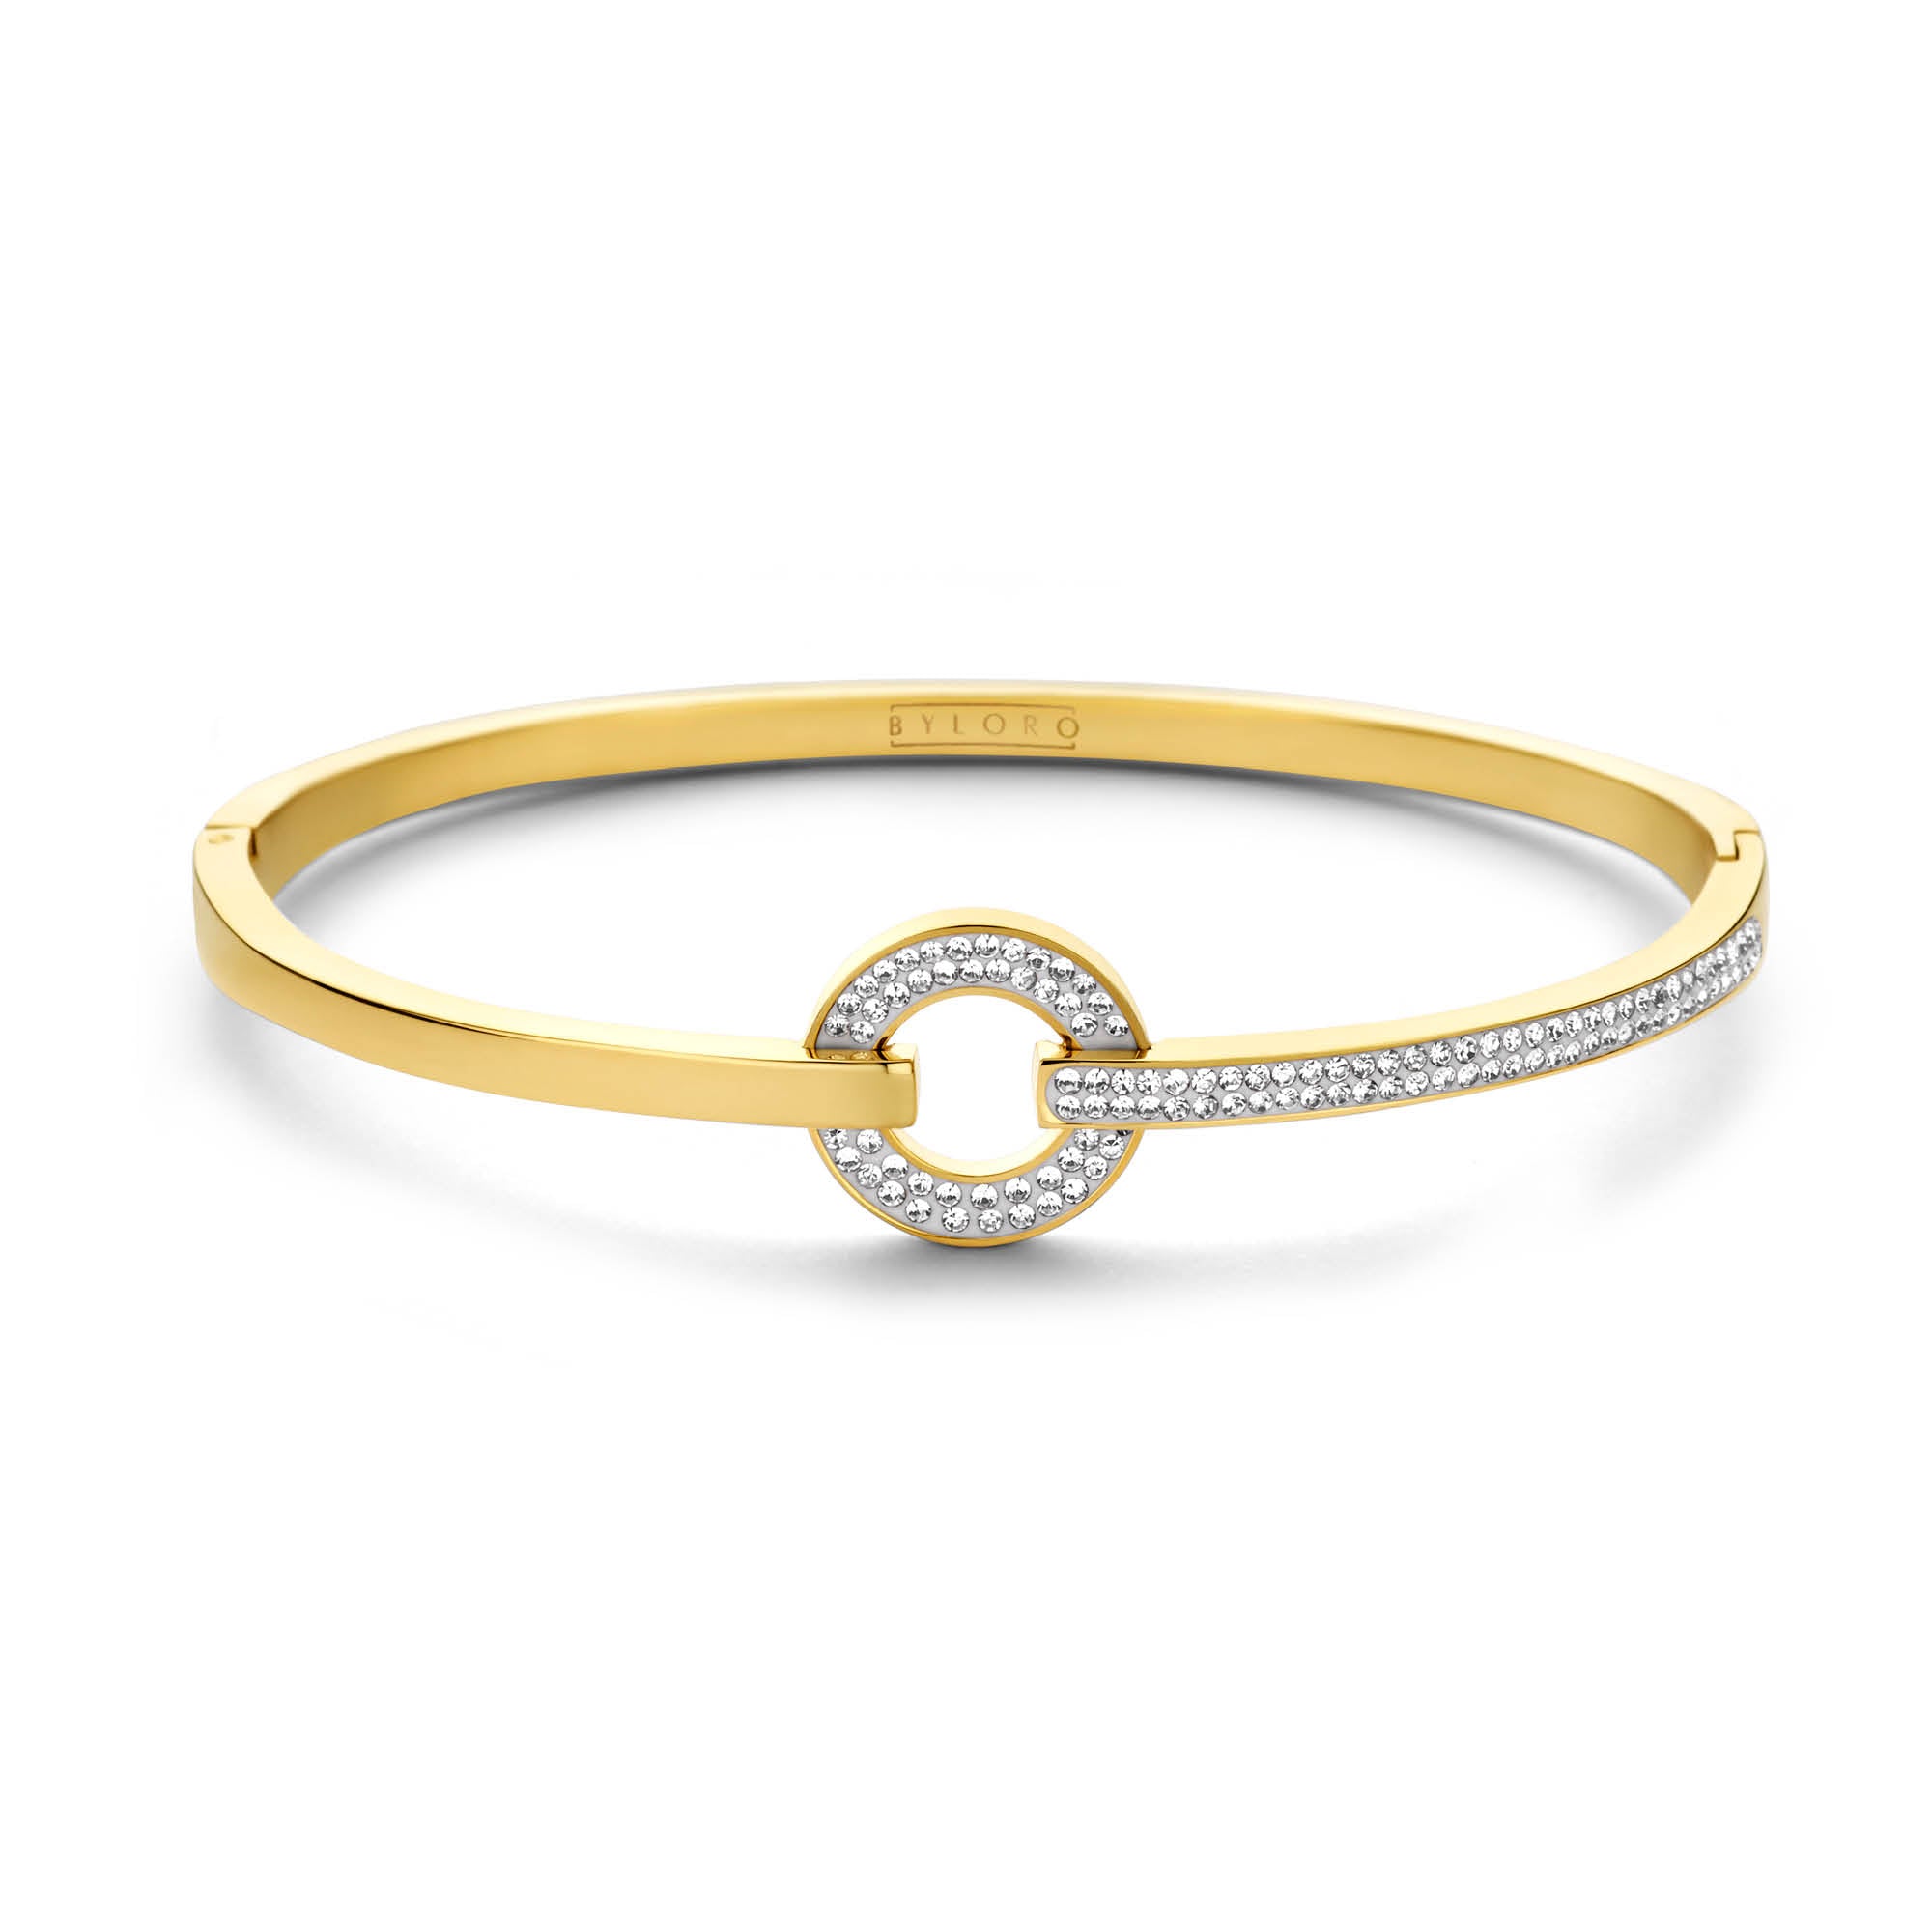 FORBES CIRCLE OF TRUST ARMBAND